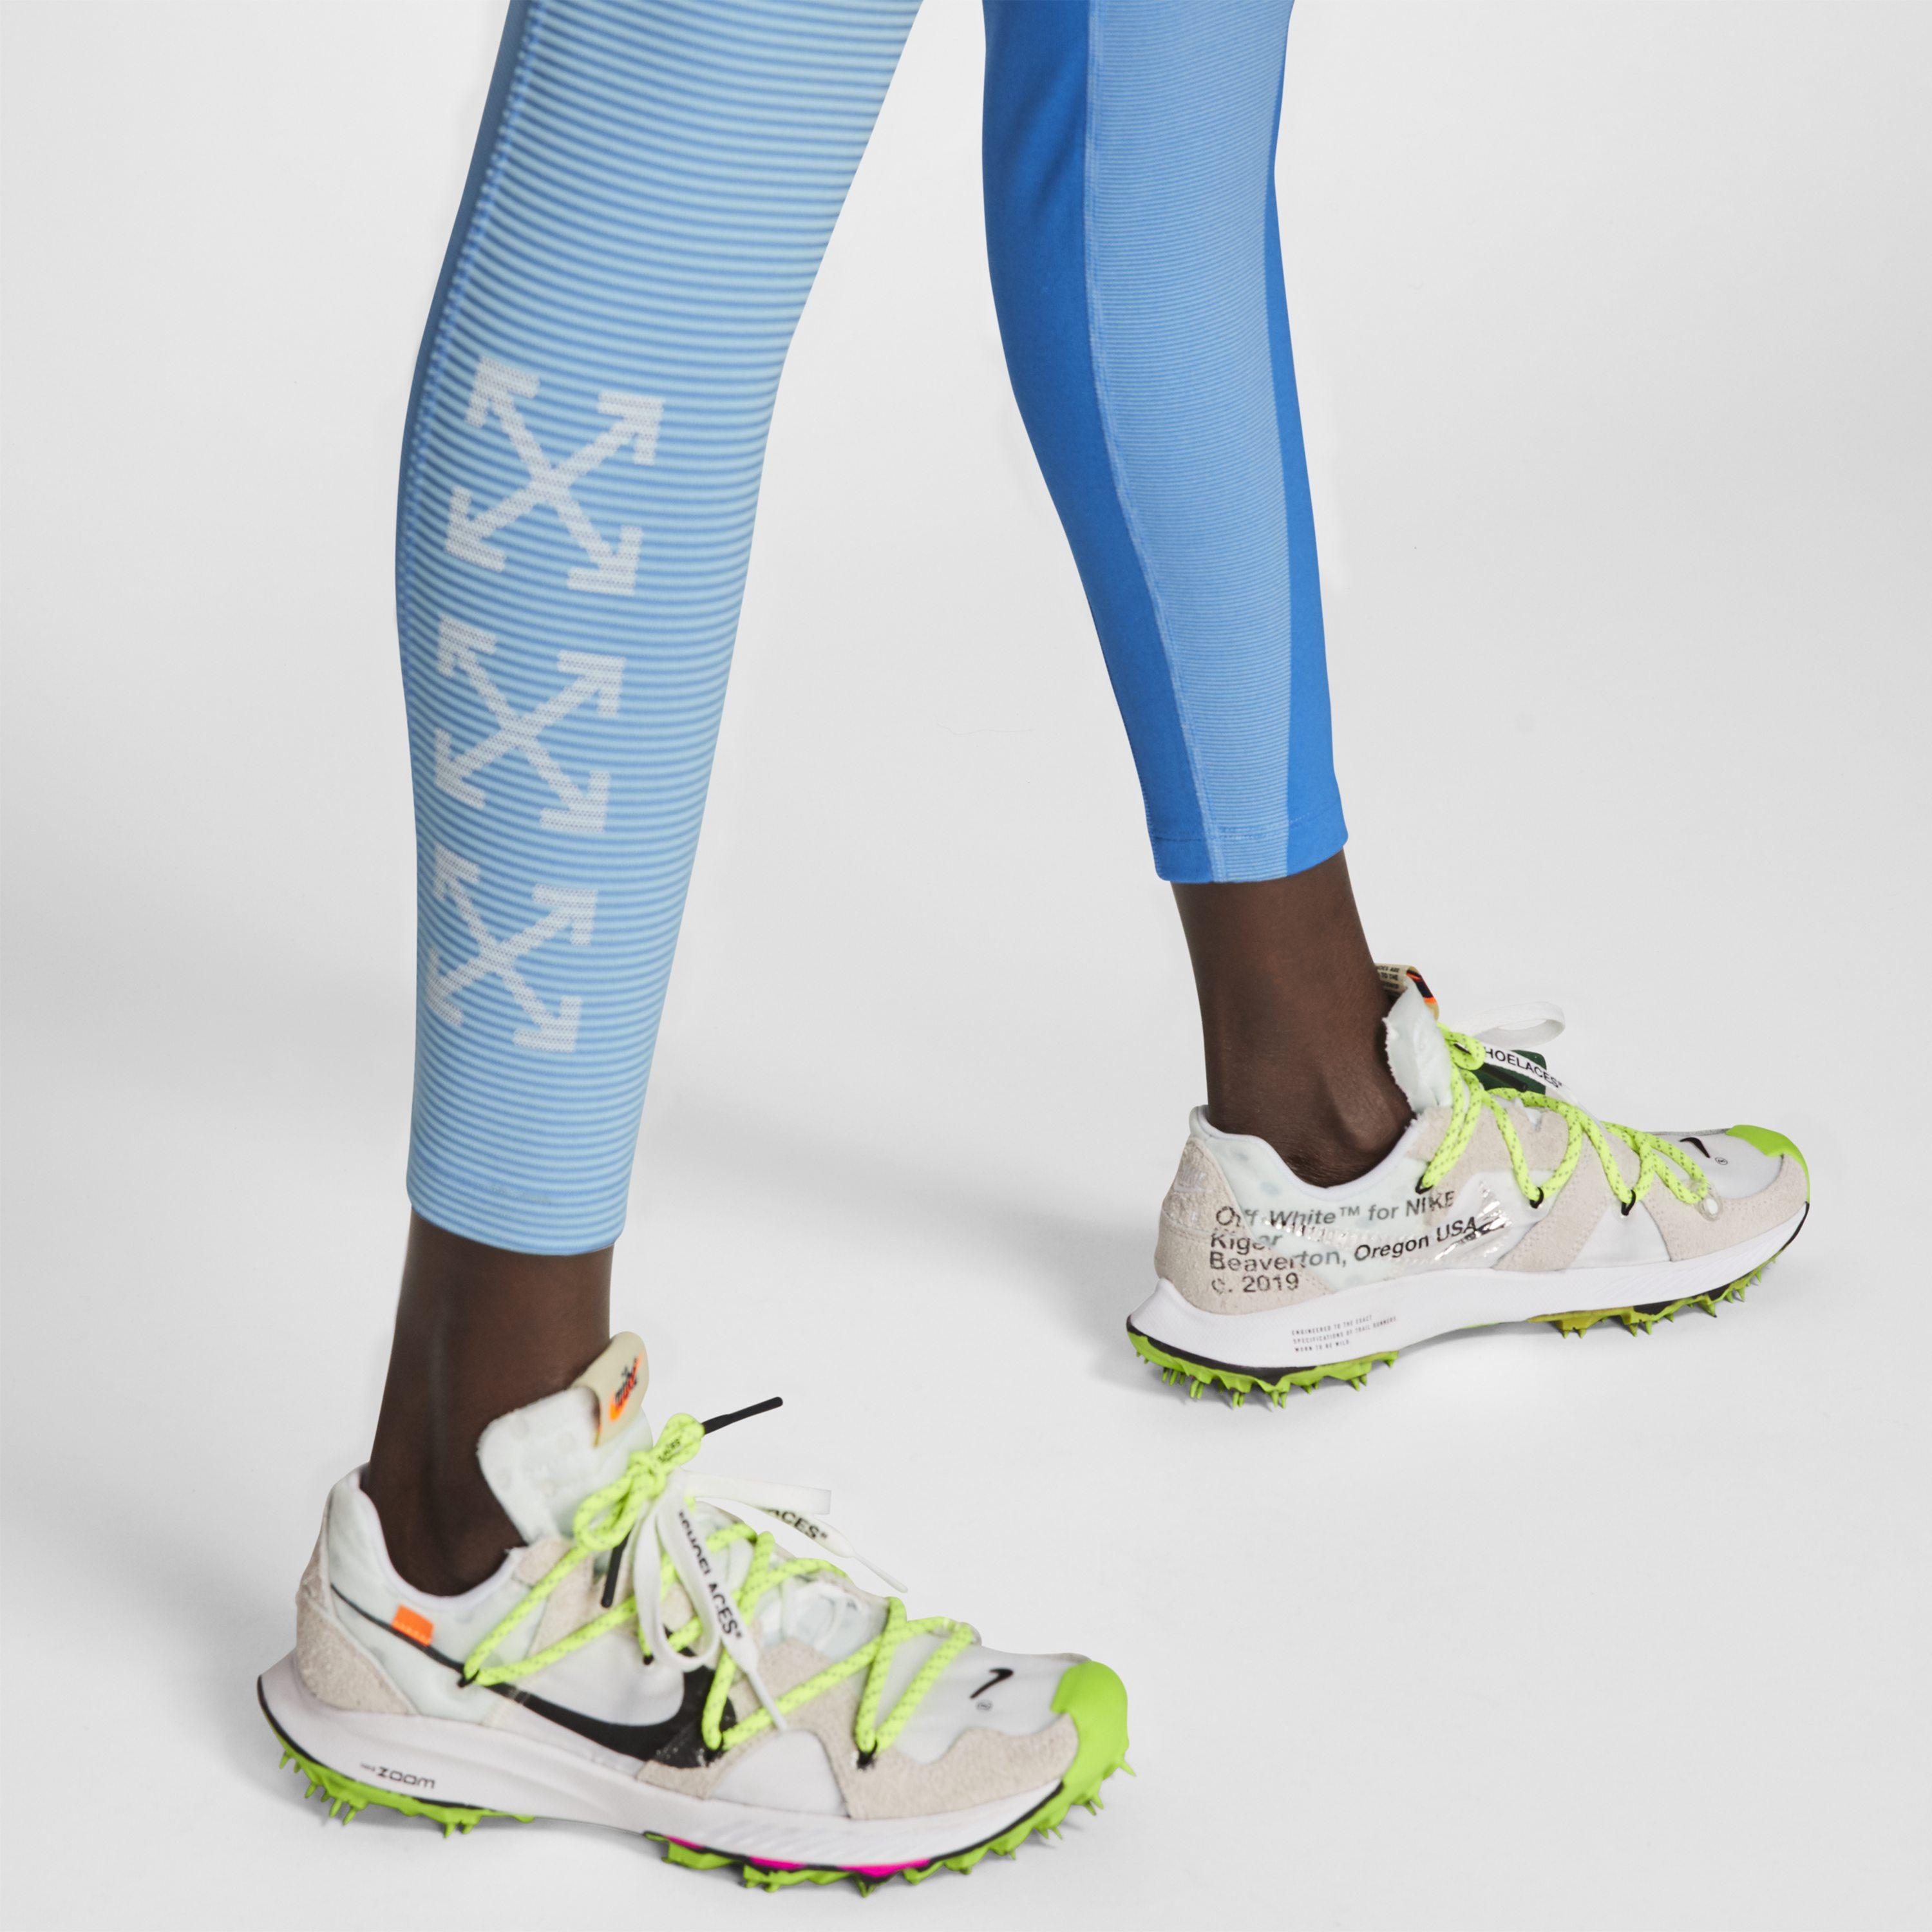 Nike X Off-white Running Tights in Blue - Lyst